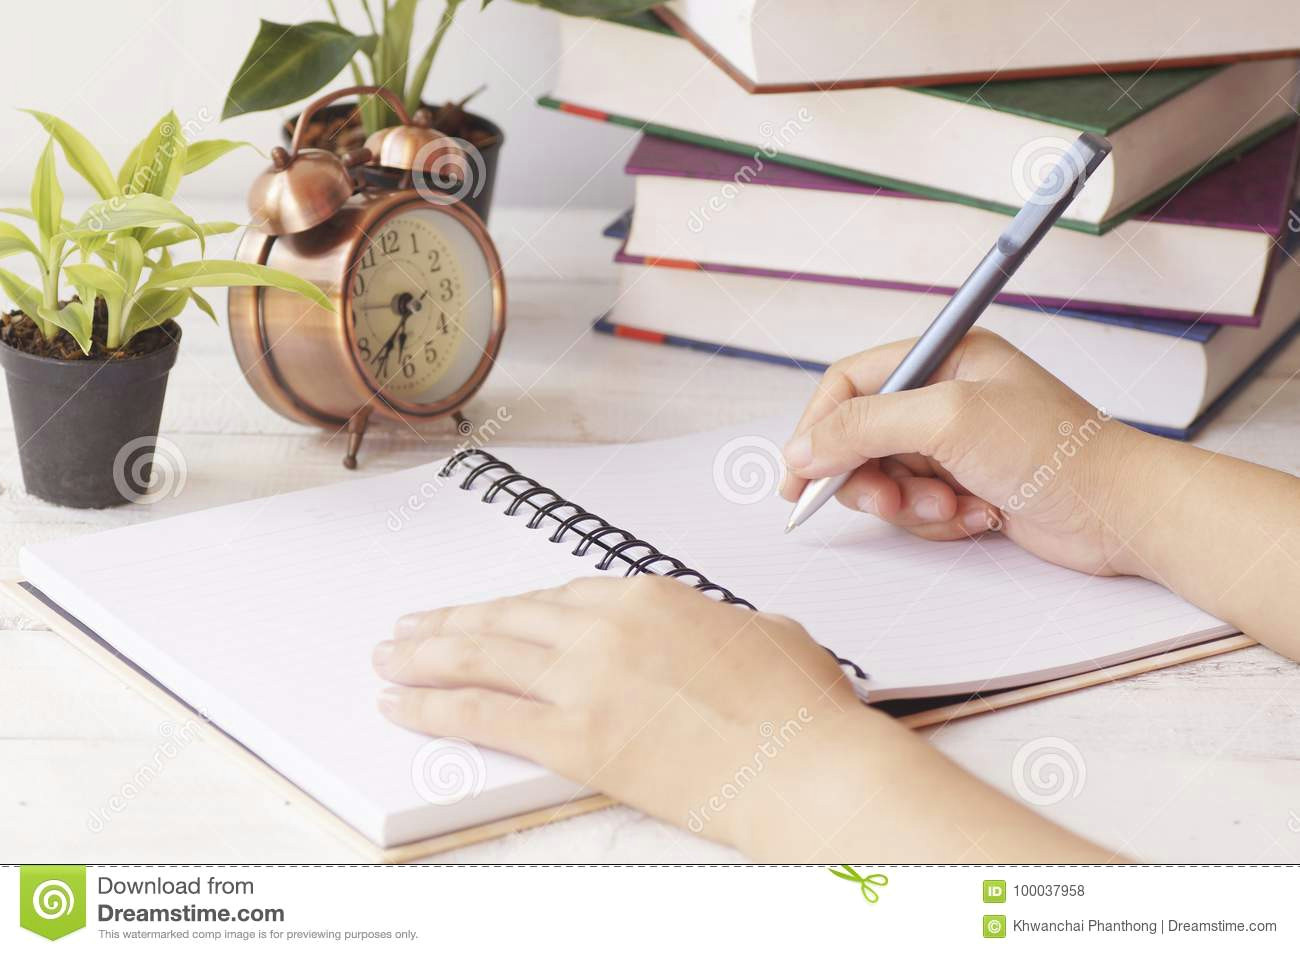 Drawings Of Hands Writing Hand Writing On Notebook On Table Stock Photo Image Of Hand Left